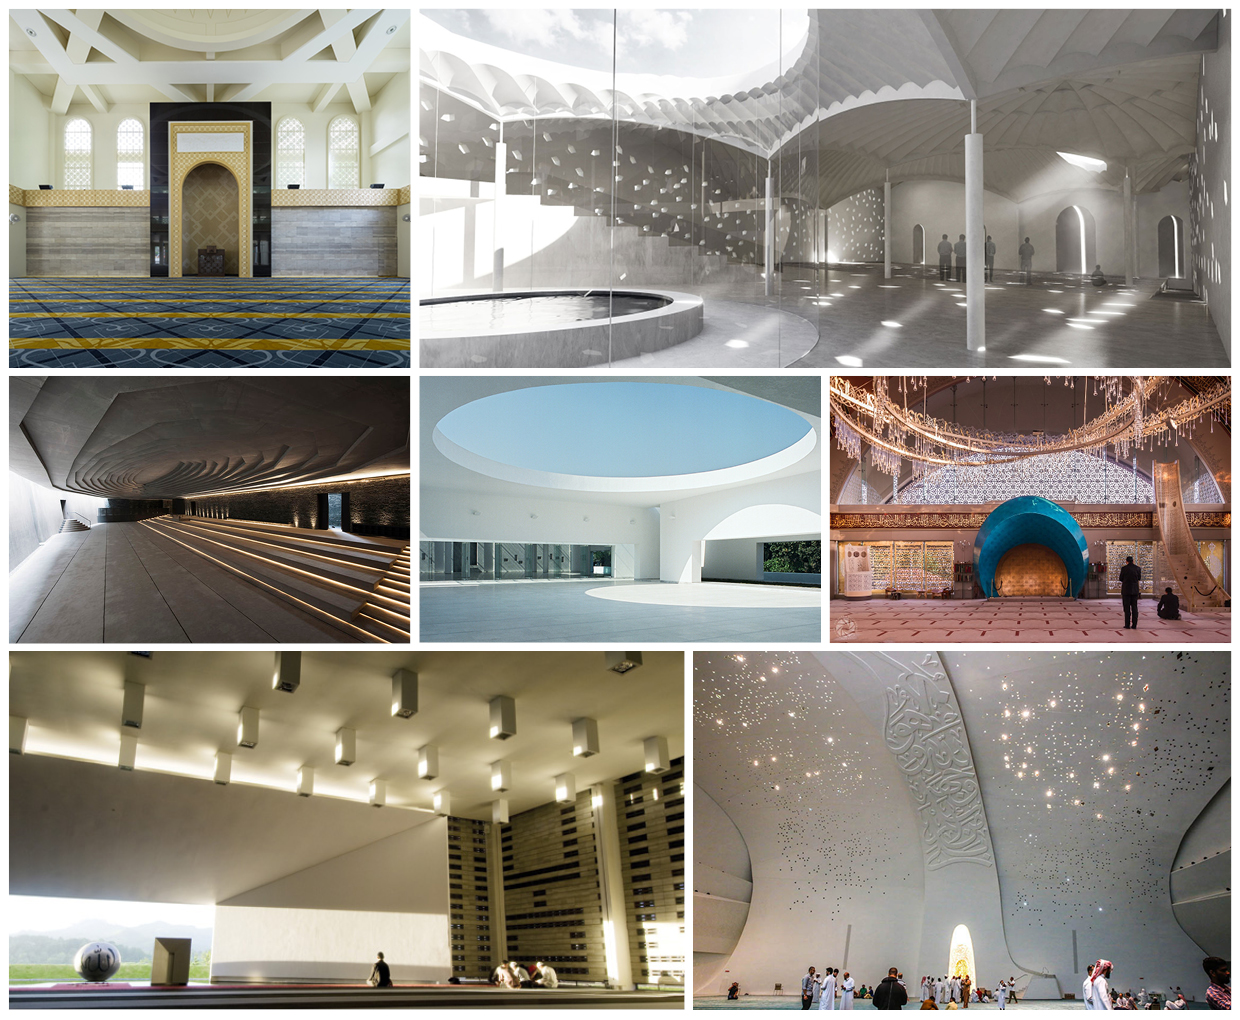 Six contemporary mosque interiors from around the world - Insight